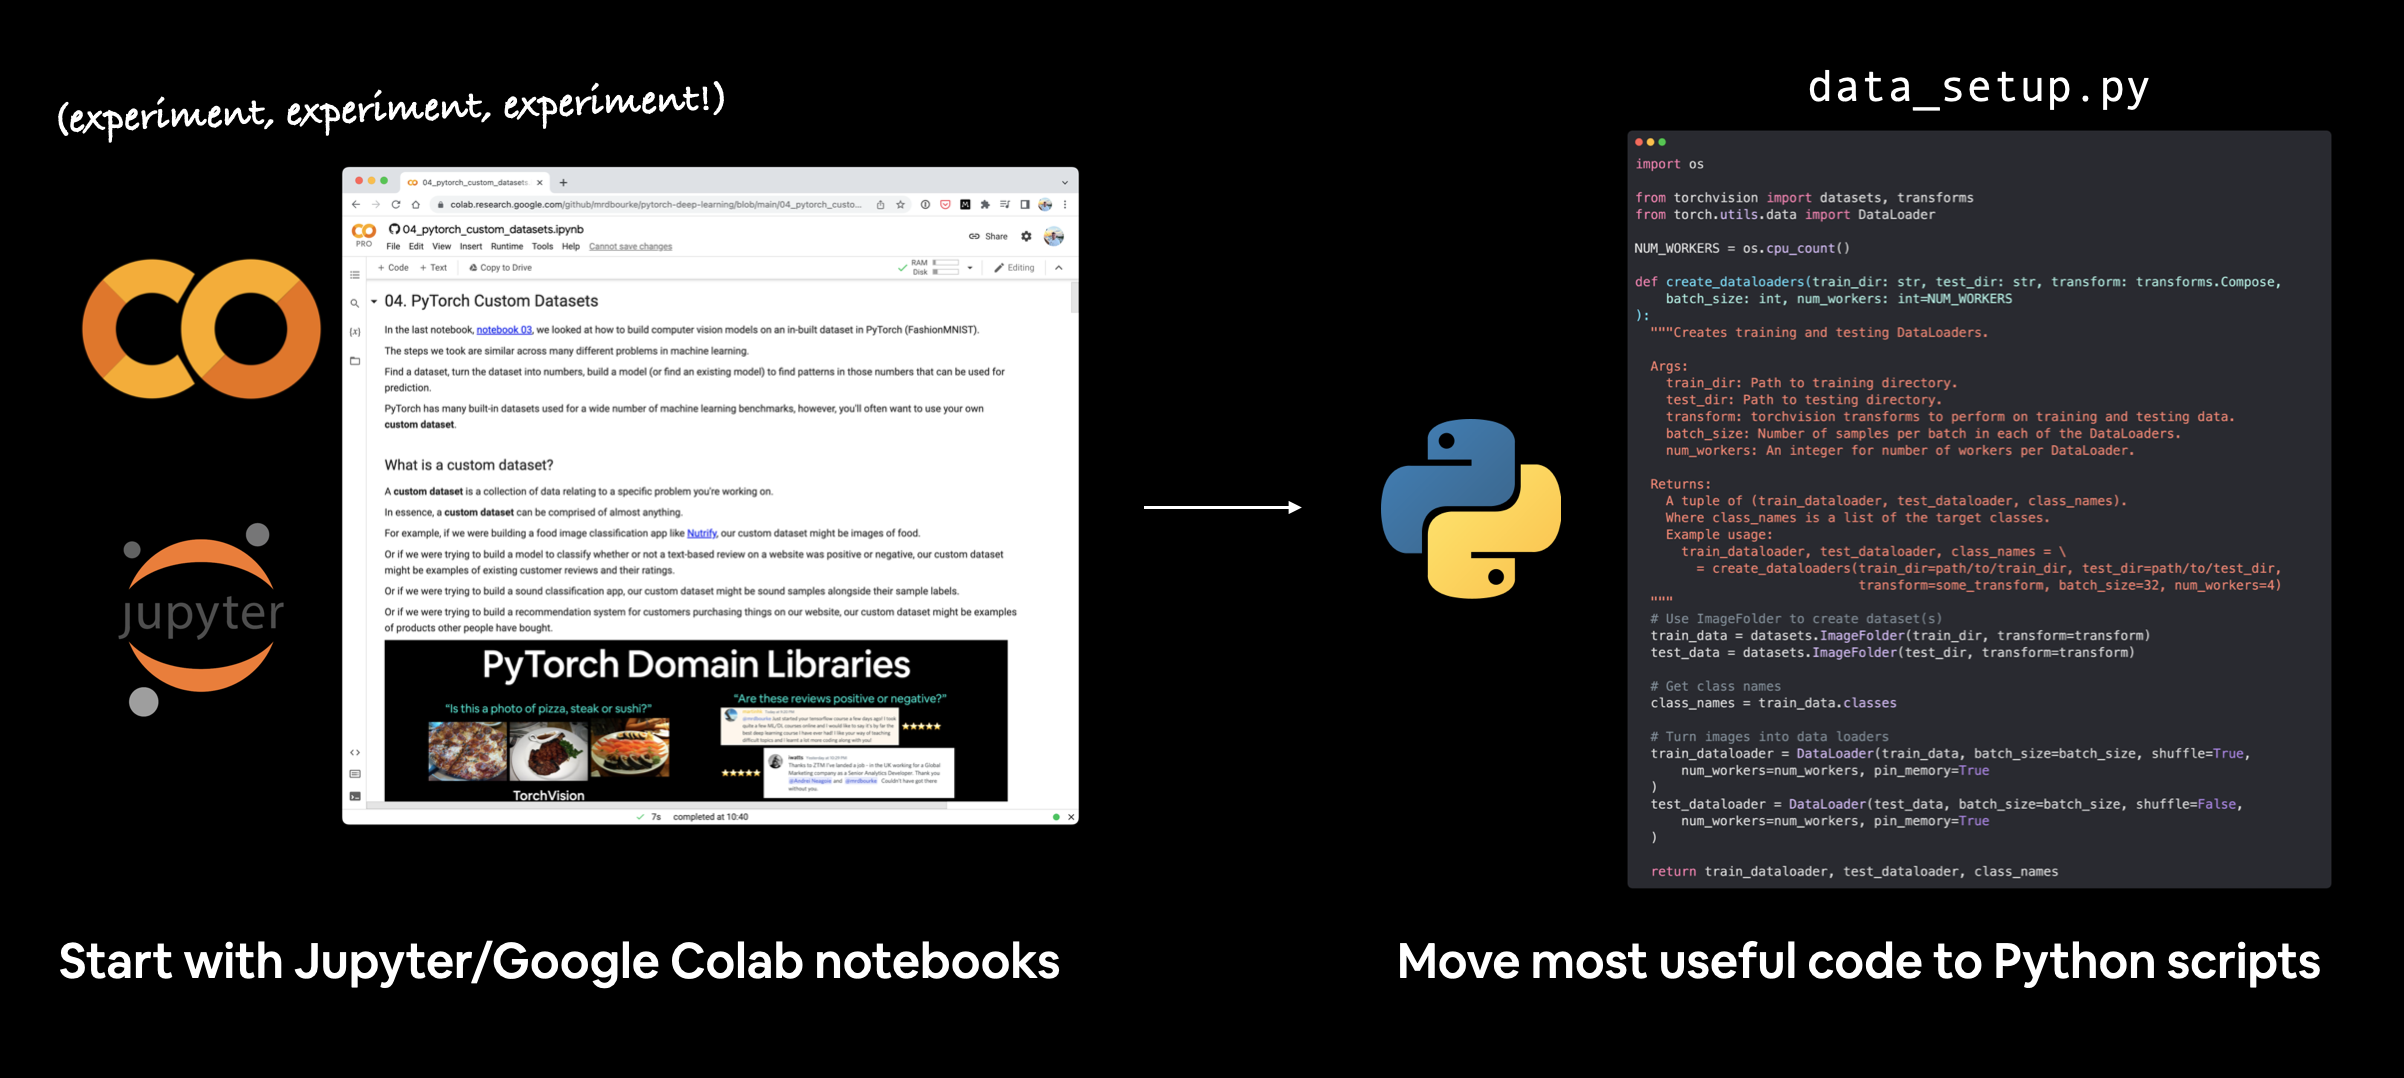 one possible workflow for writing machine learning code, start with jupyter or google colab notebooks and then move to Python scripts when you've got something working.